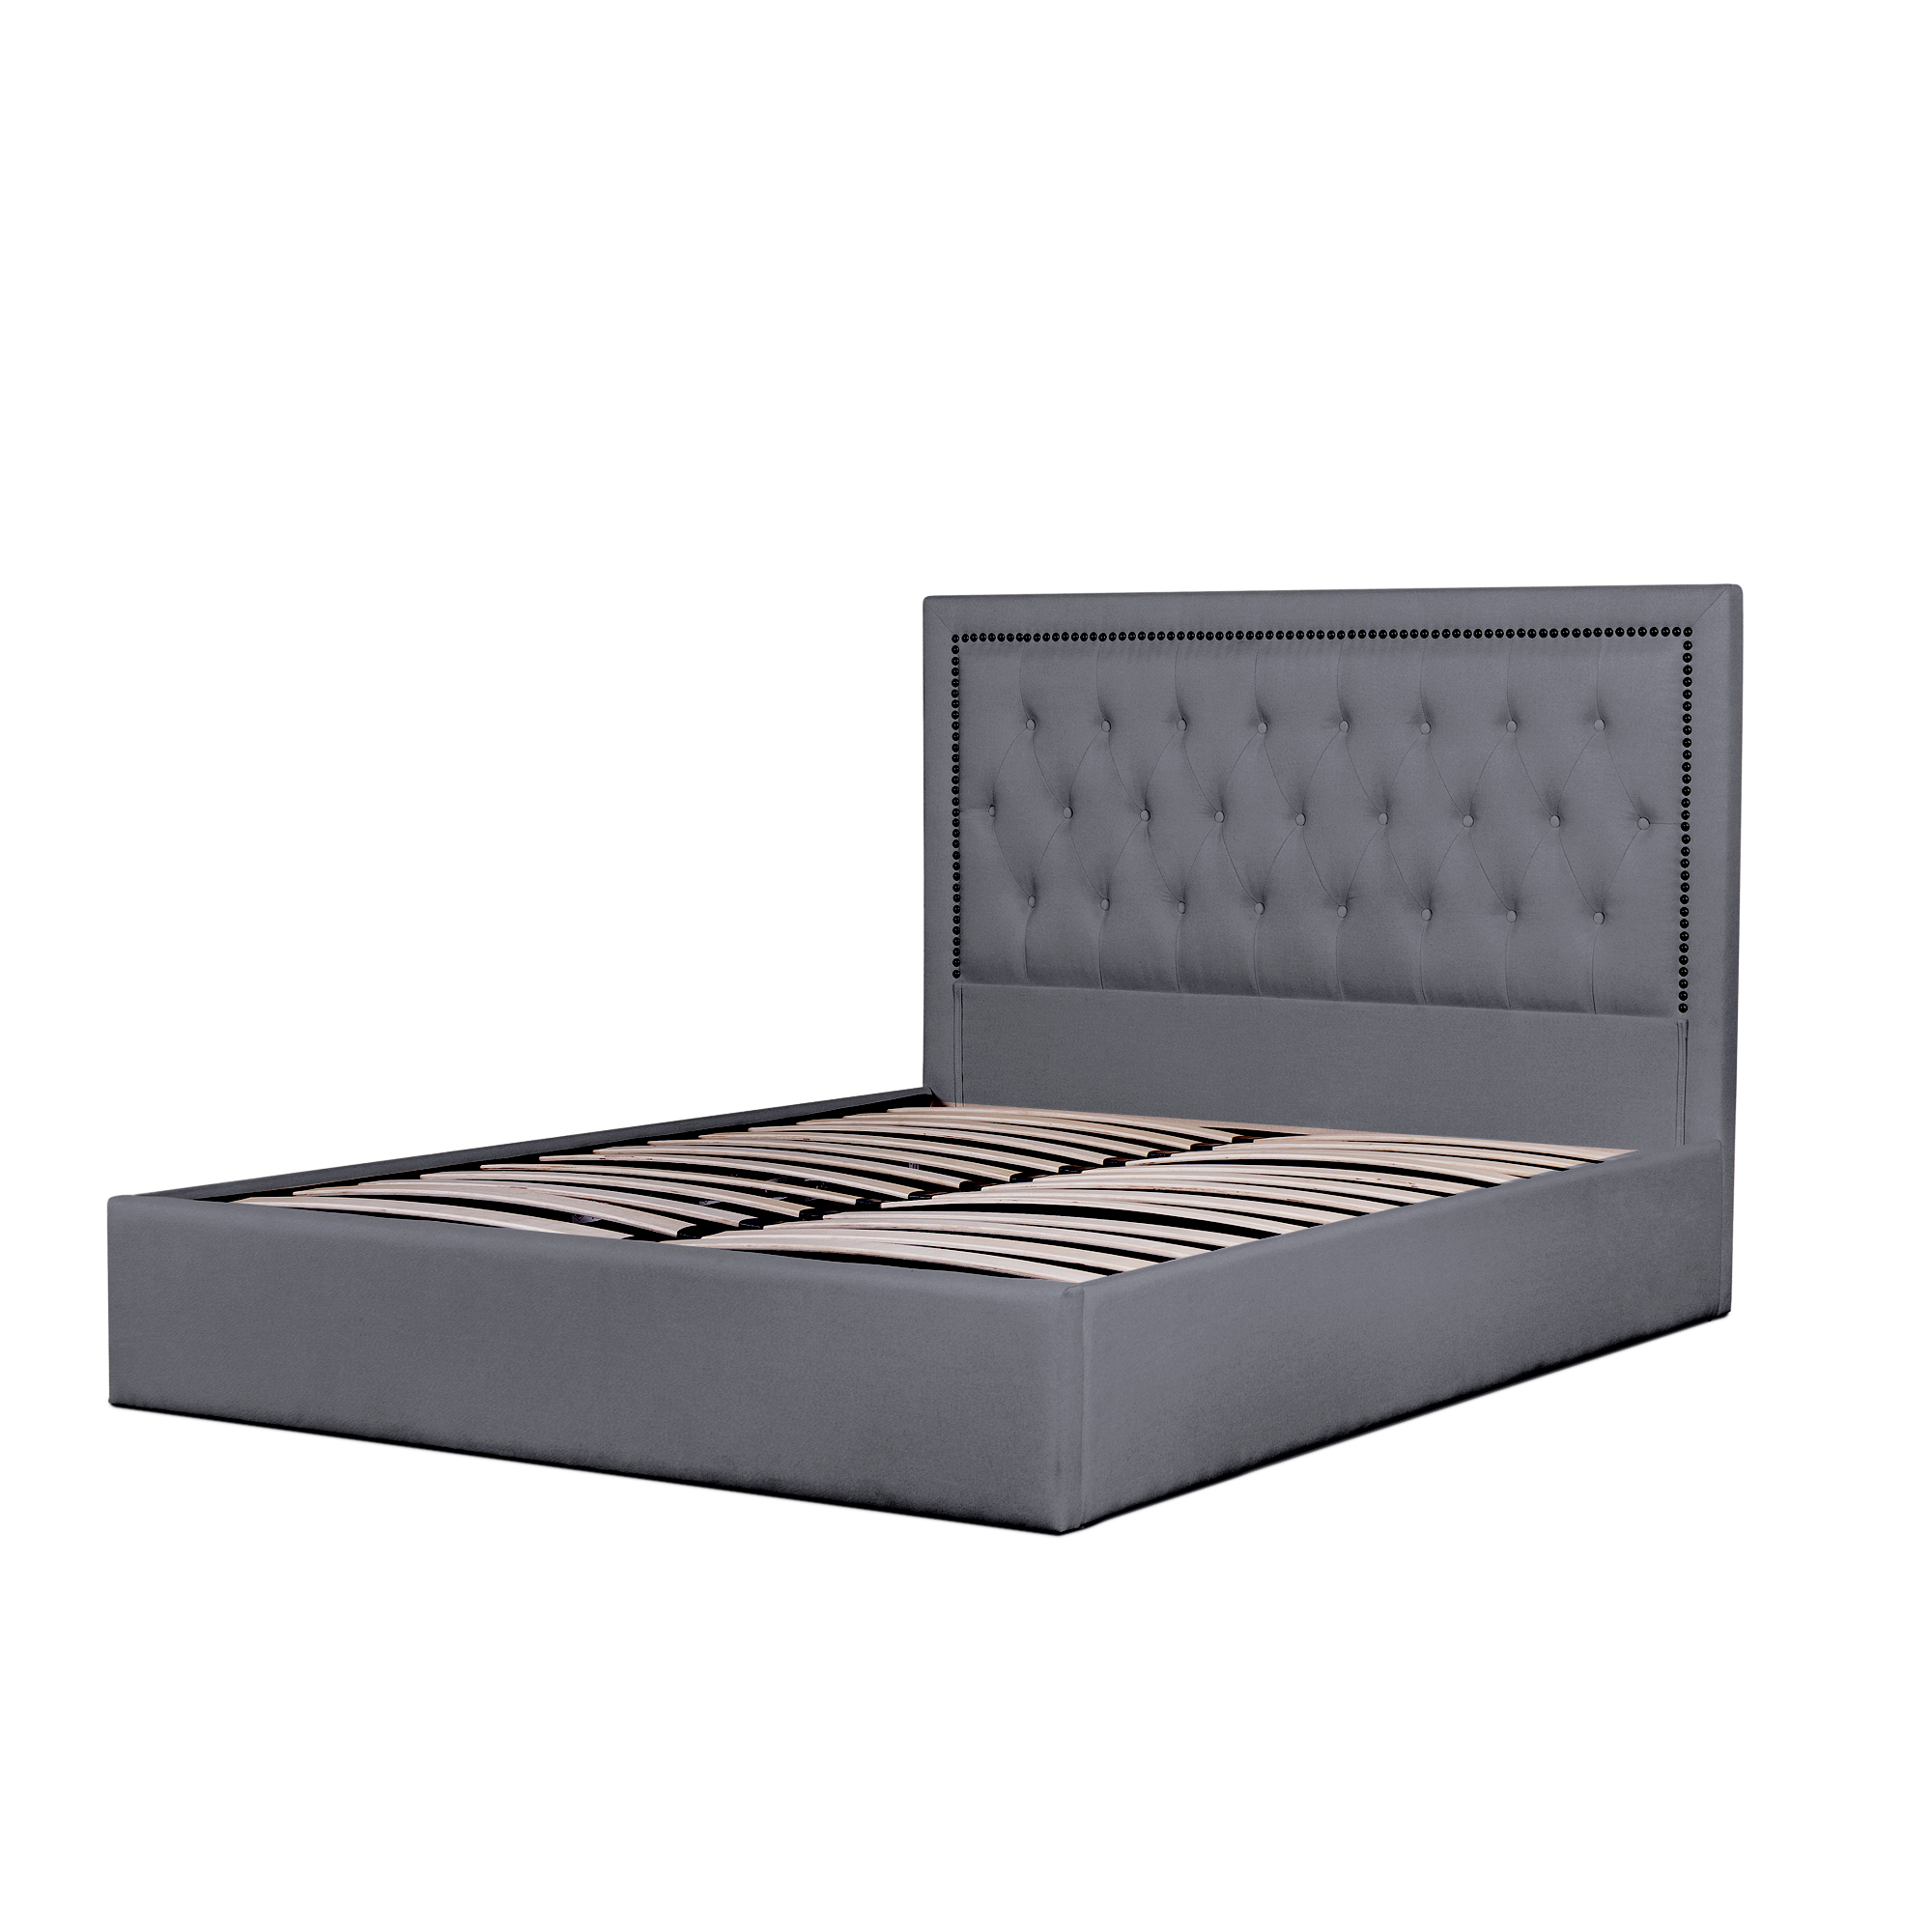 Addison Fabric King Bed Frame in Lunar Grey with Tufted Headboard